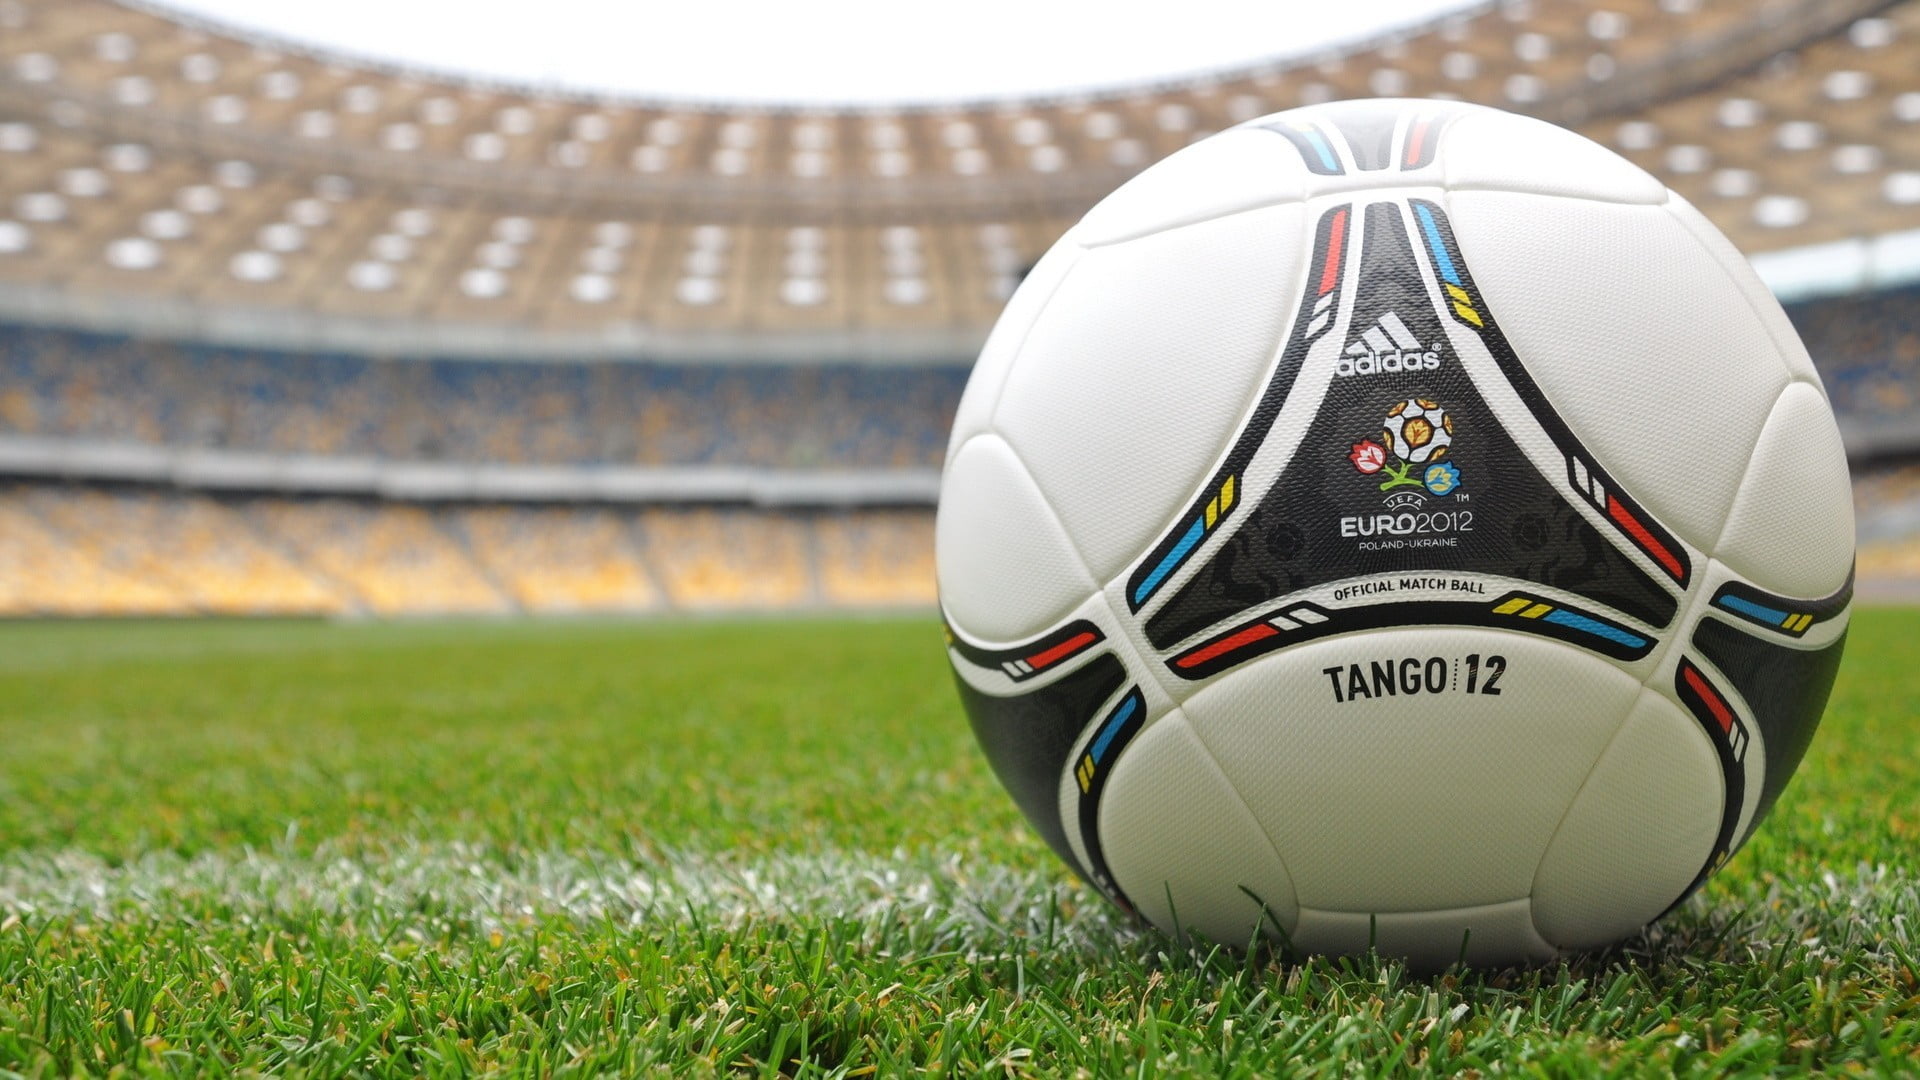 white, black, and red Adidas Tango 12 soccer ball, EURO 2012, Adidas, soccer, soccer pitches